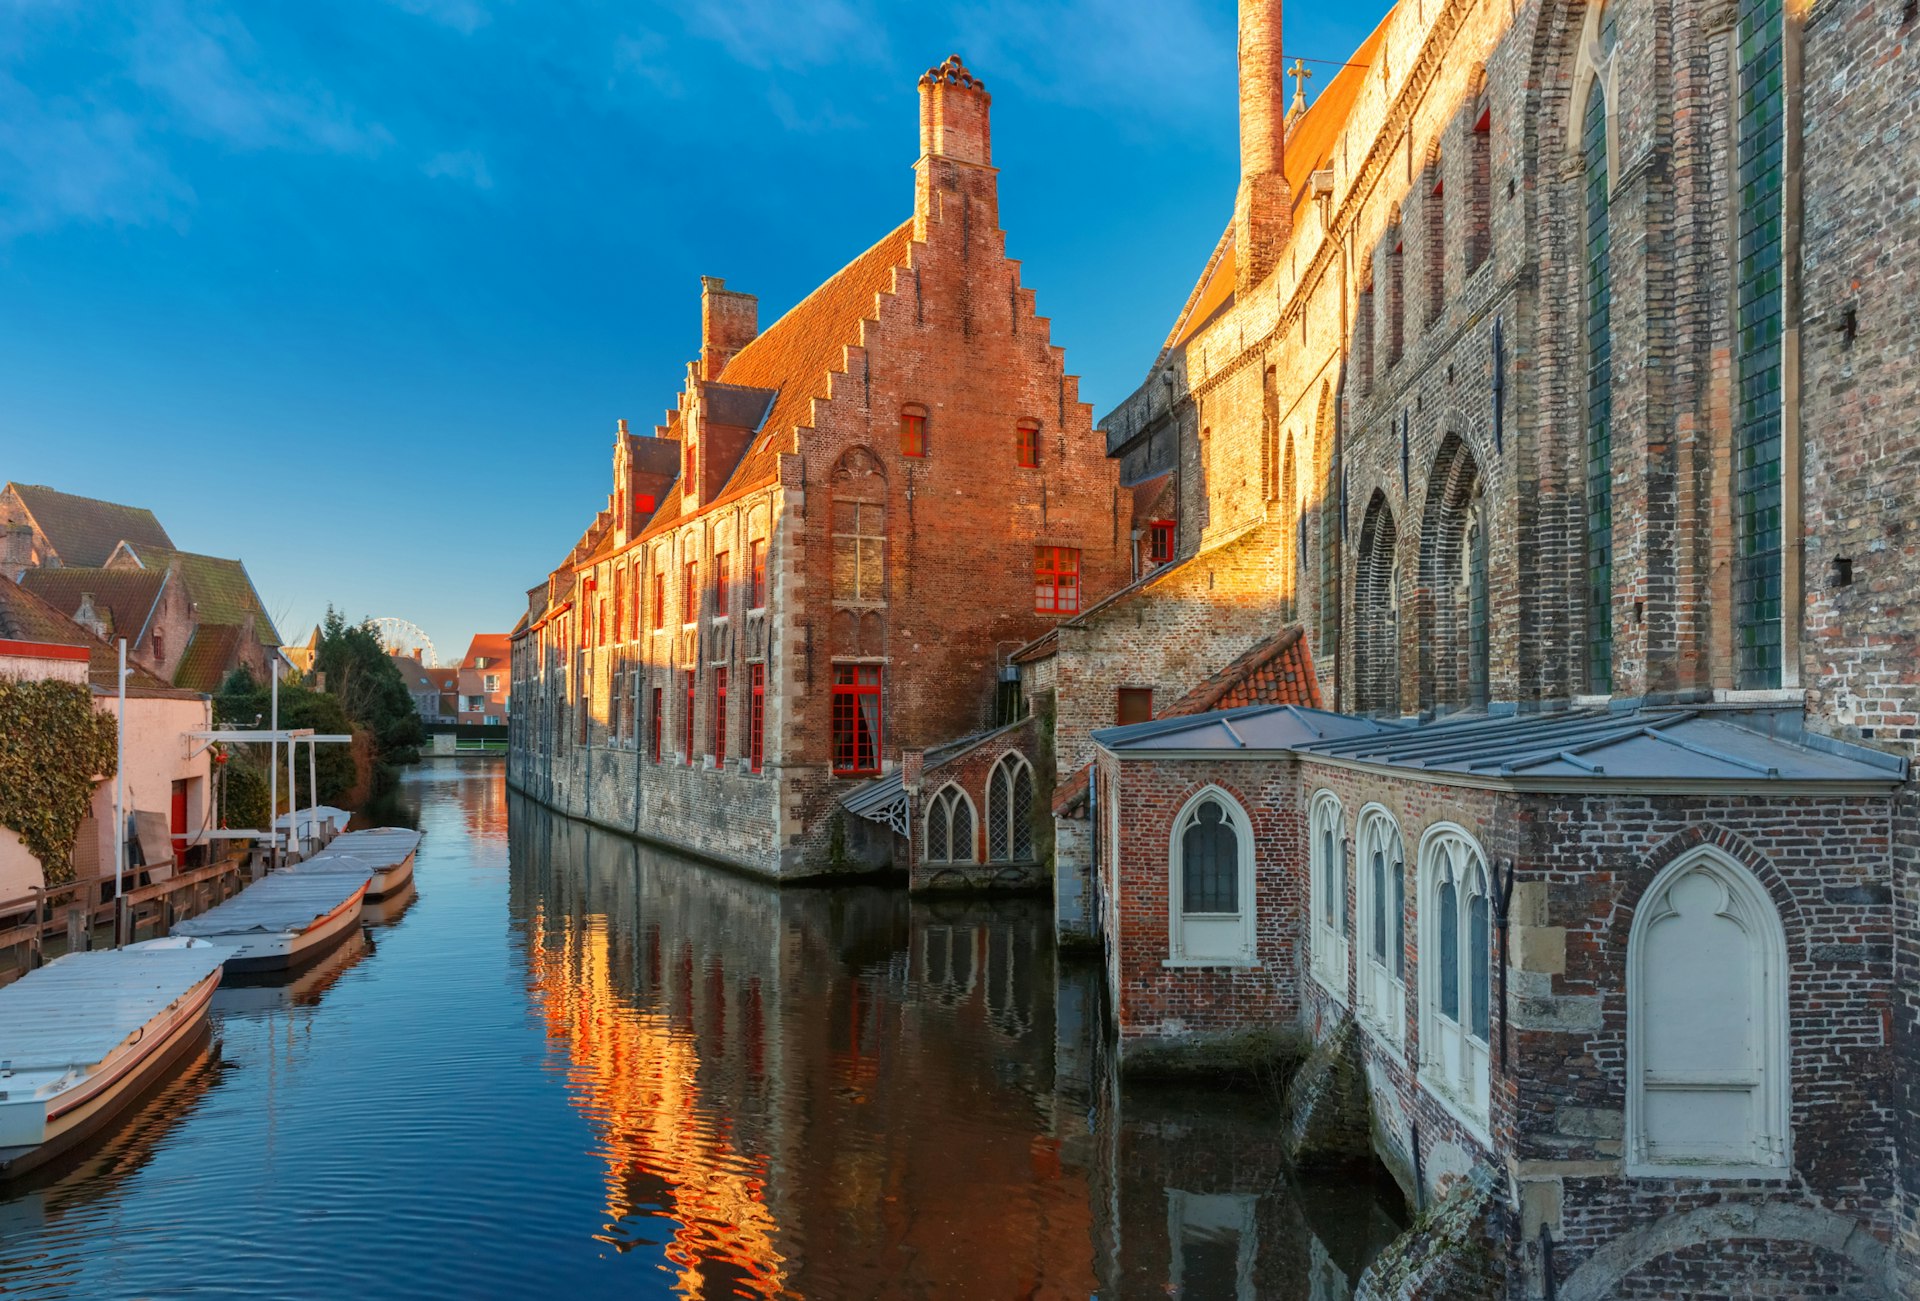 The exterior of the Museum Sint-Janshospitaal against the canal on a calm, blue-skied winter morning in Bruges, Belgium